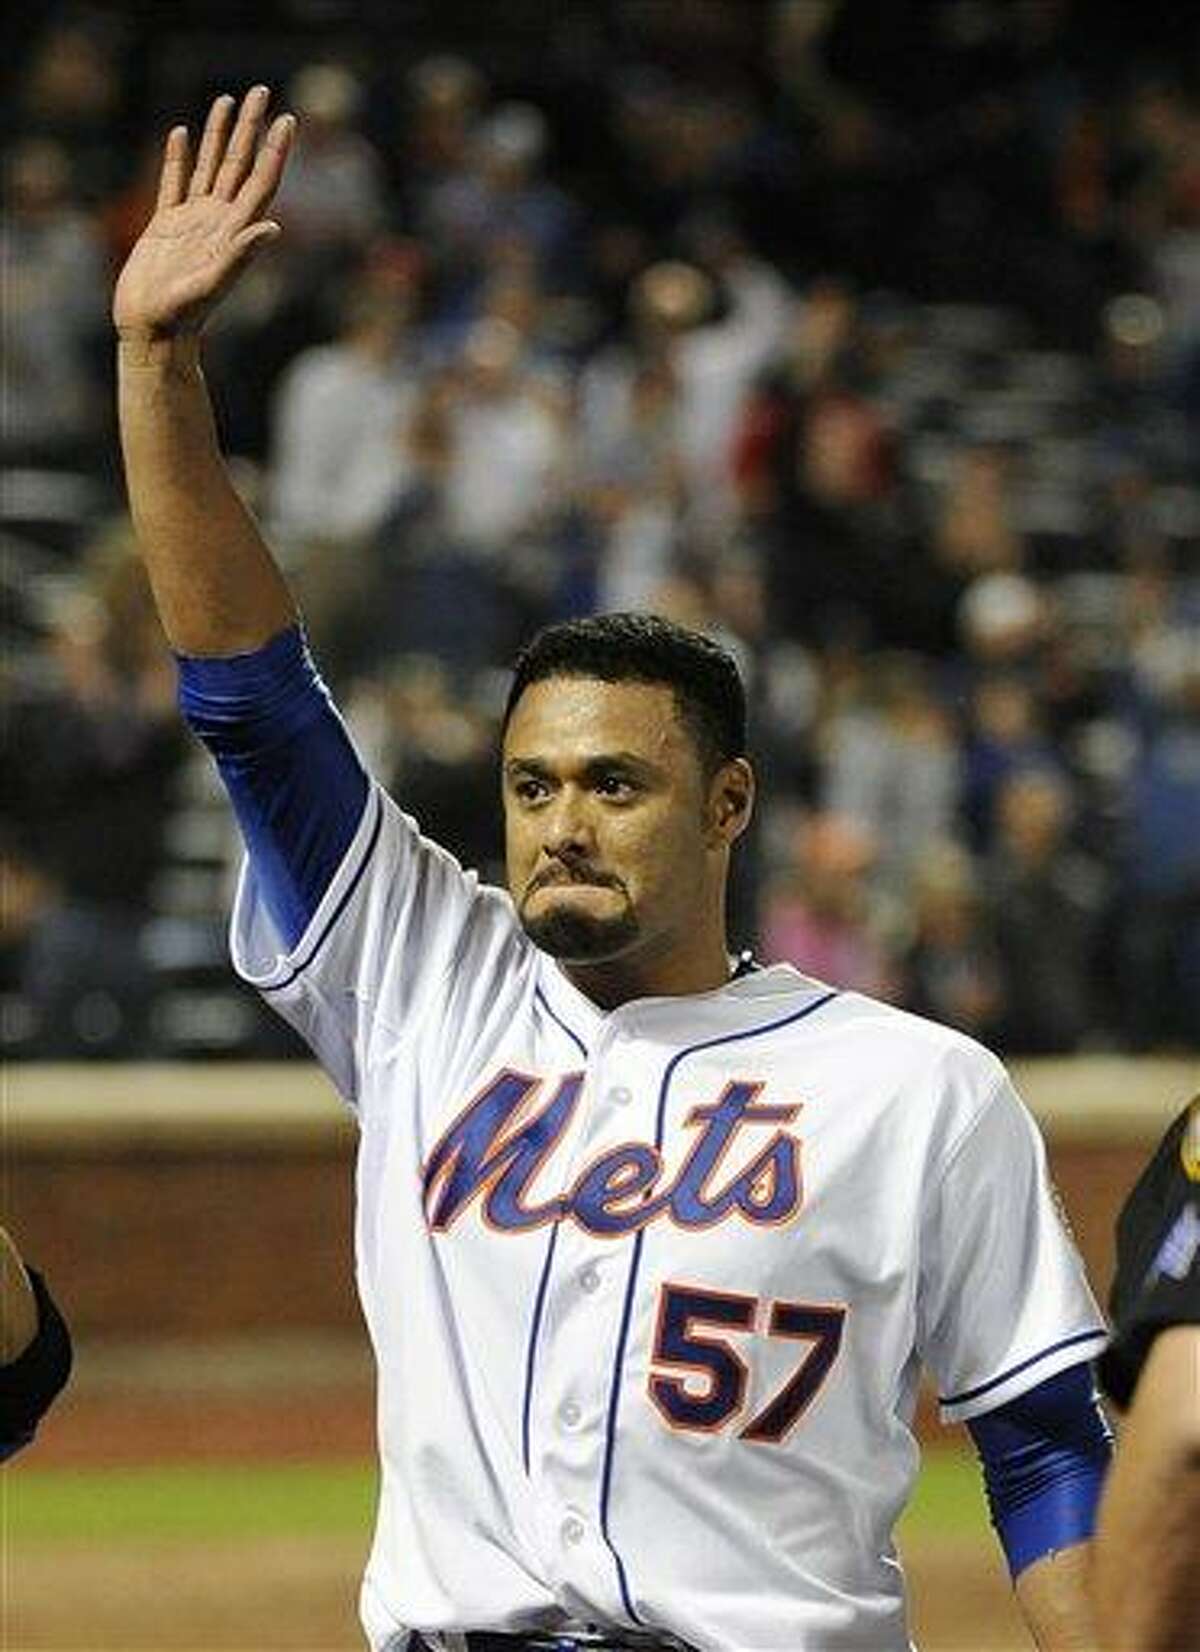 Johan Santana faces his old team for the first time 